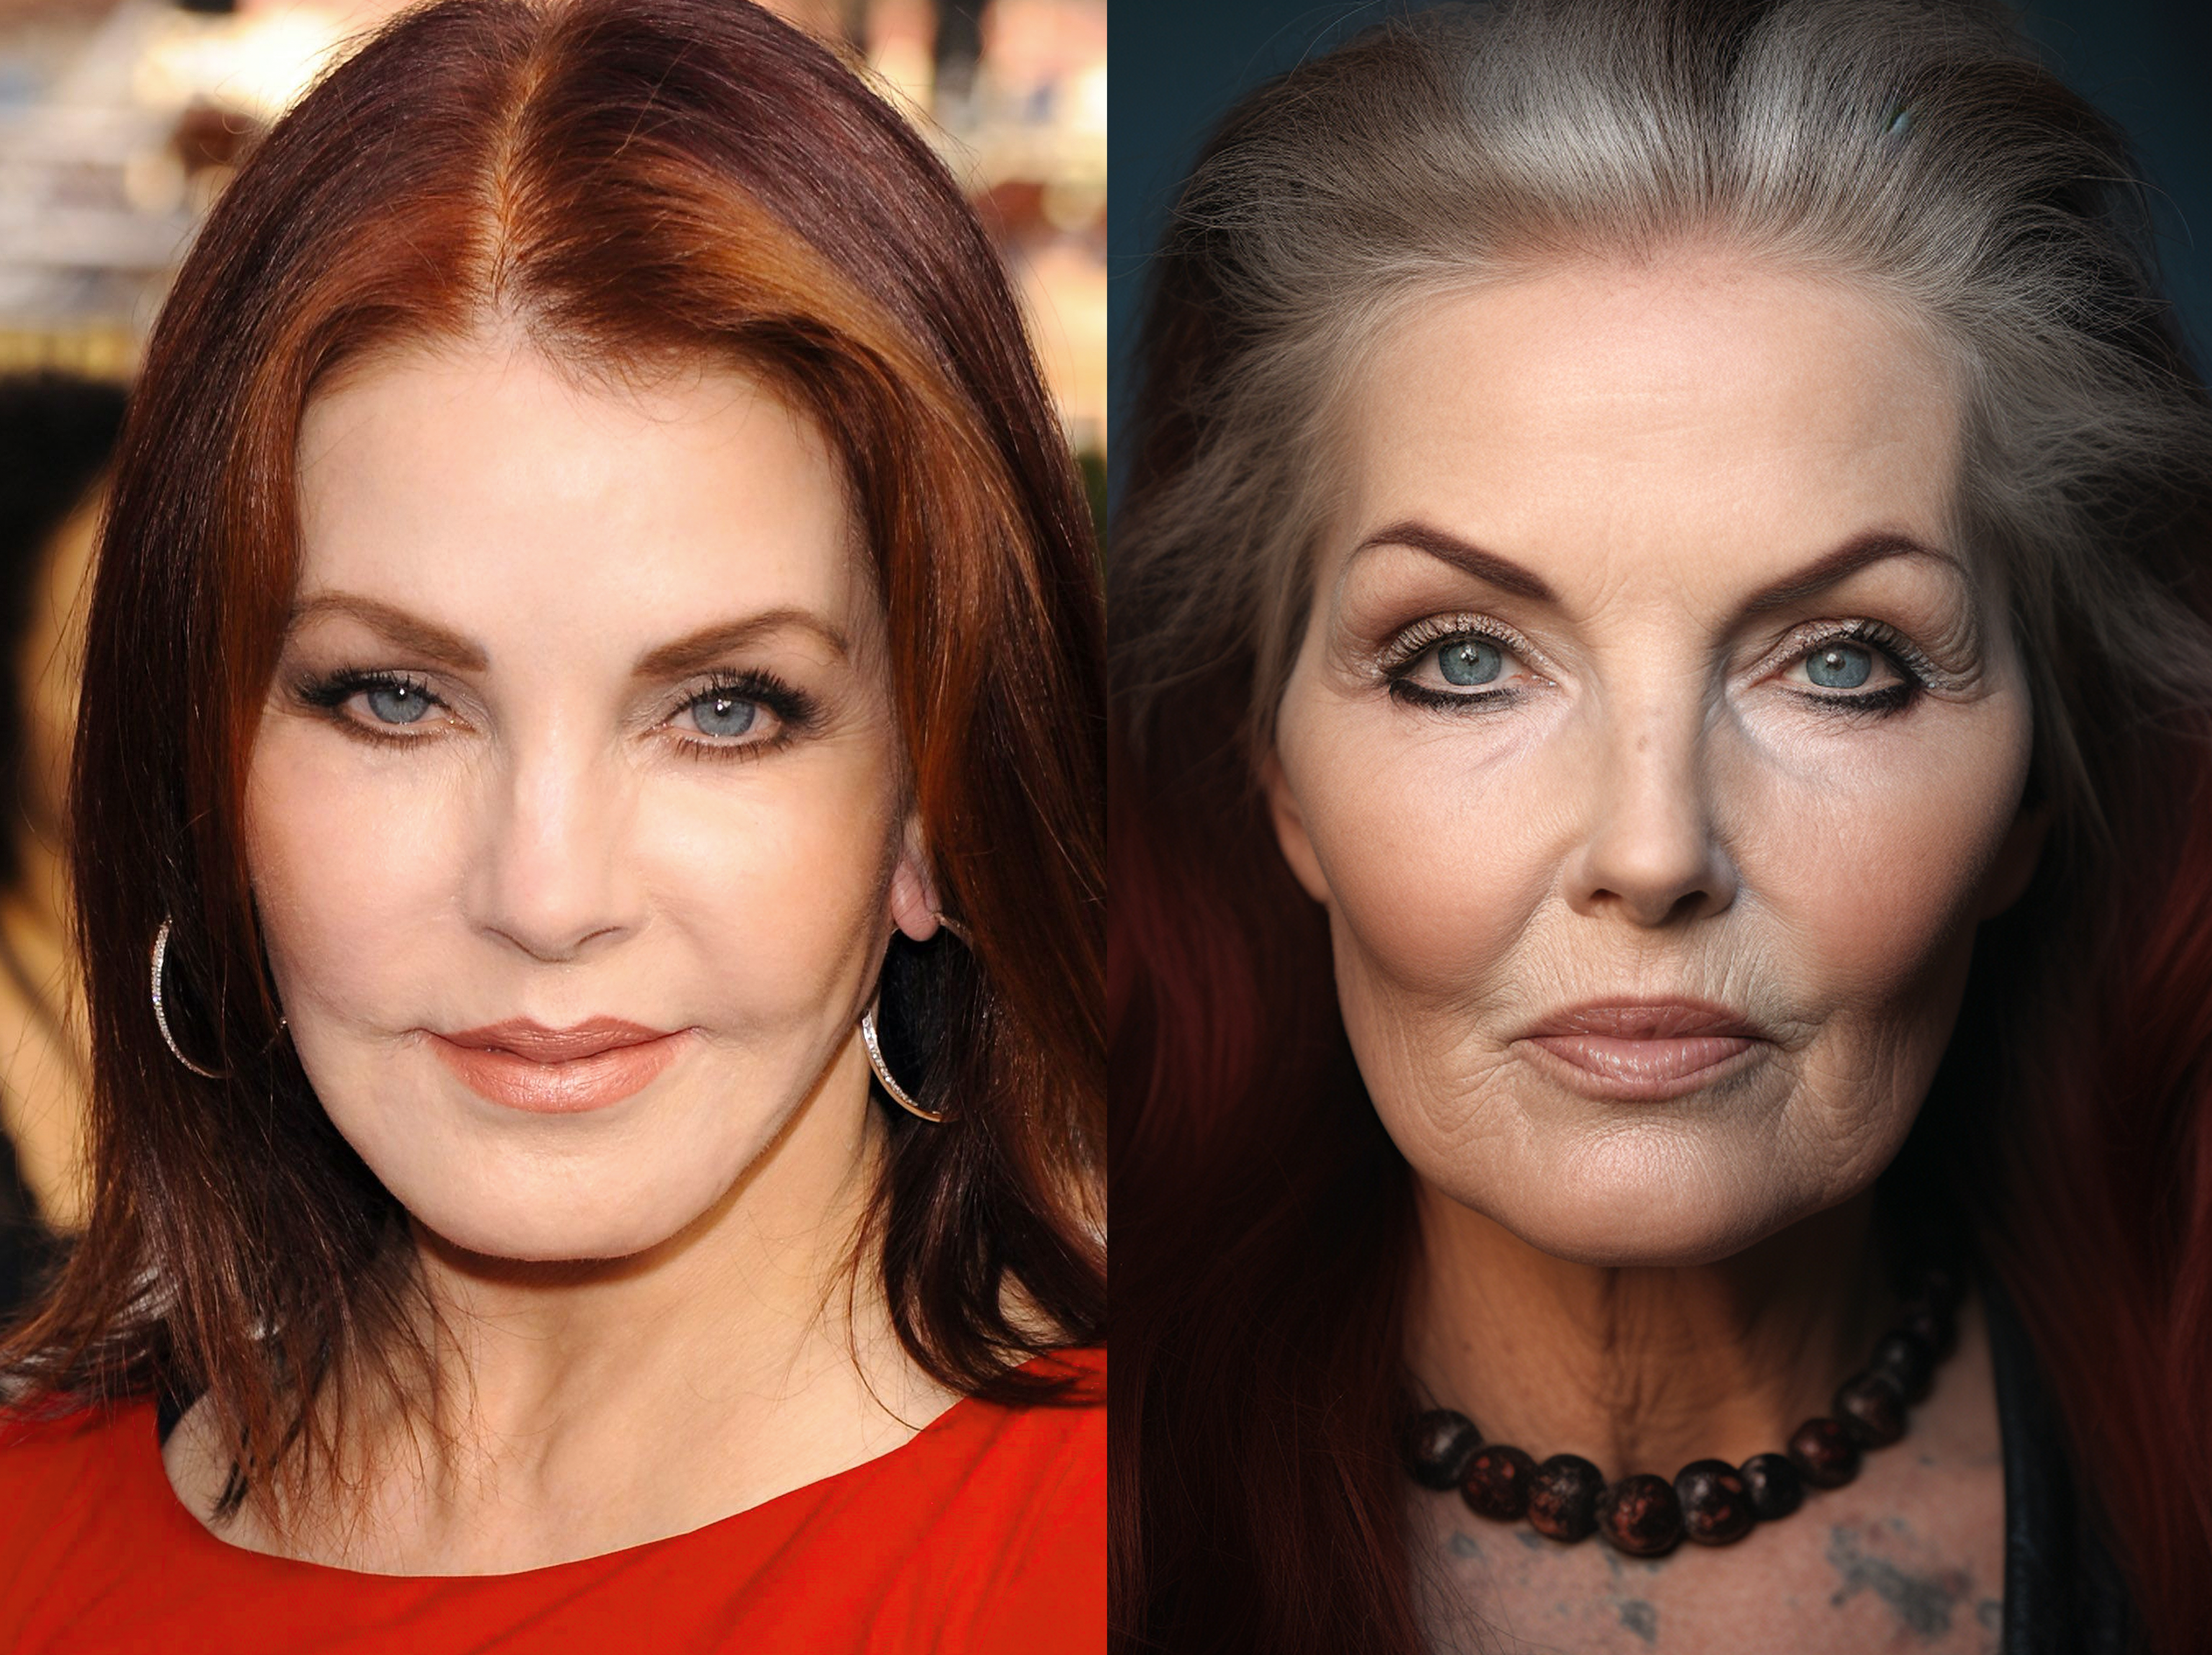 How Priscilla Presley would have looked according to an AI-generated image | Source: Midjourney